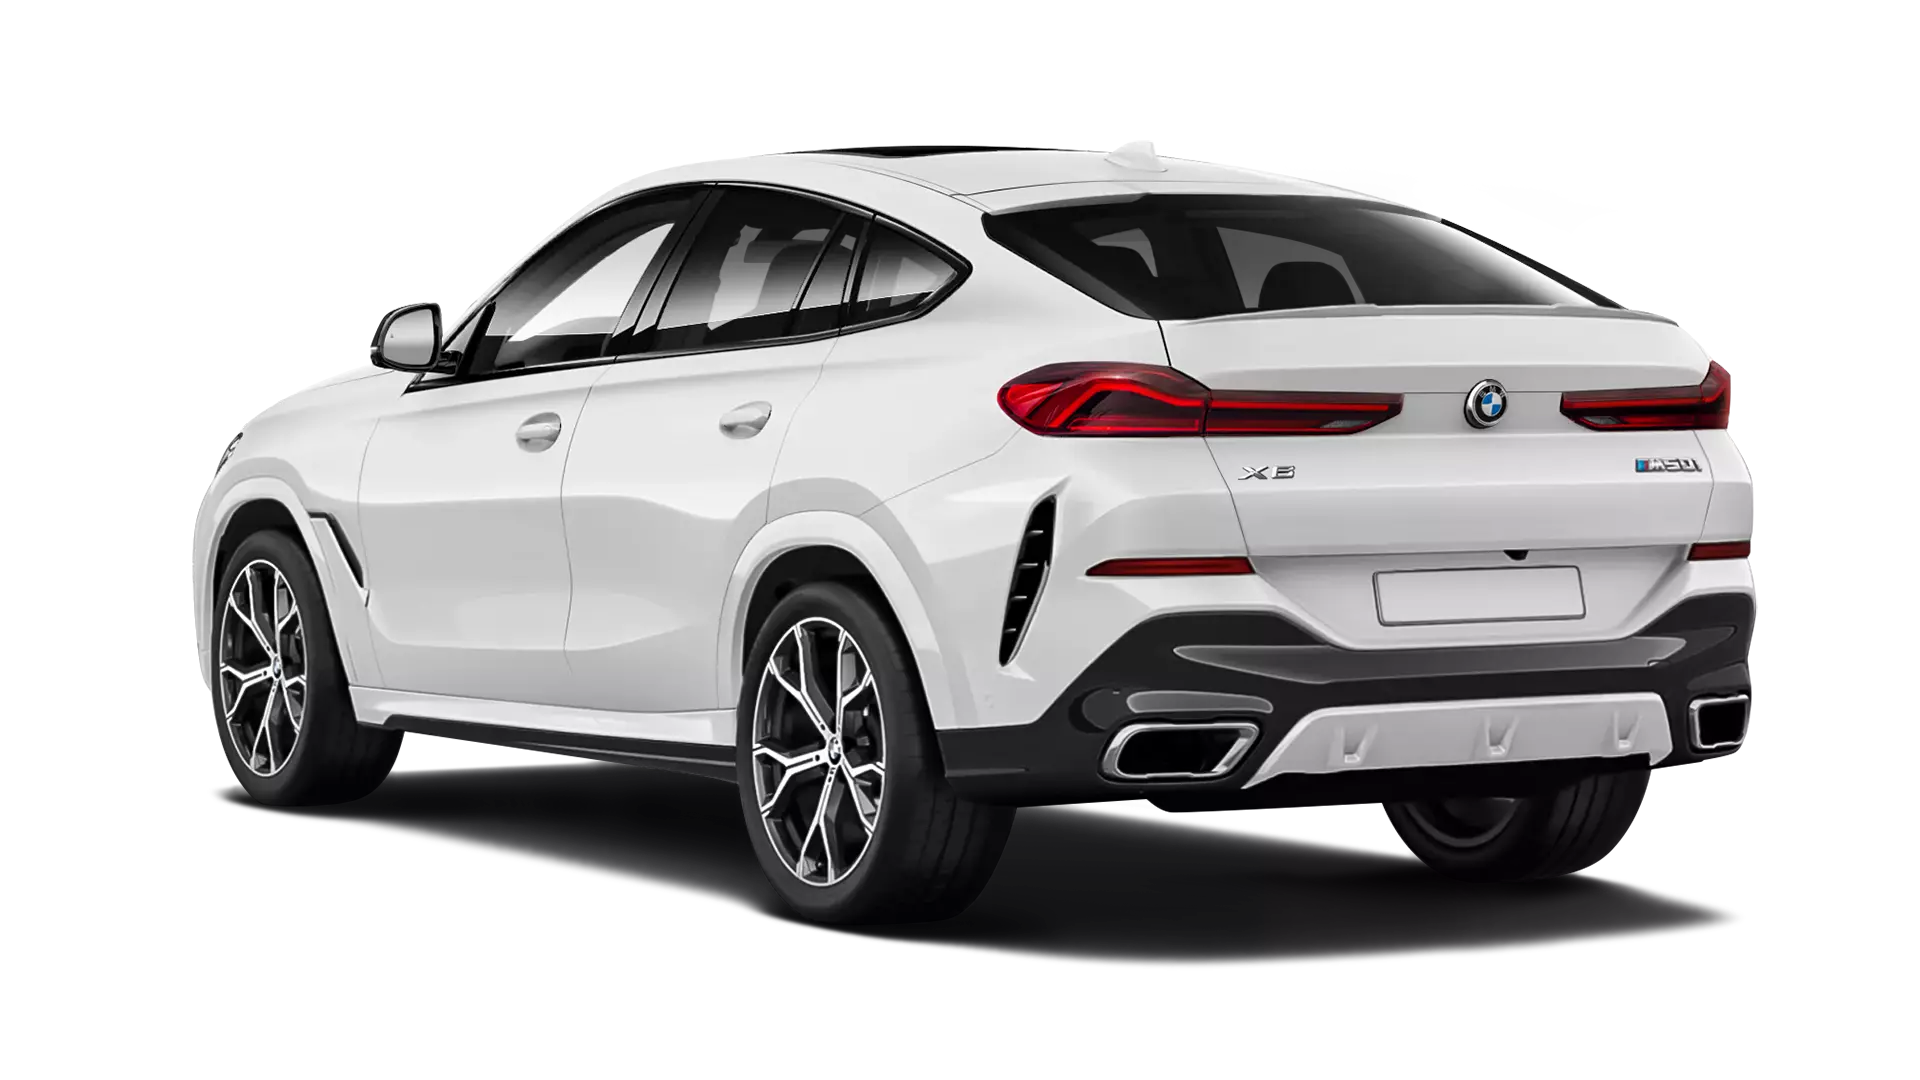 BMW X6 G06 stock rear view in Snow White color